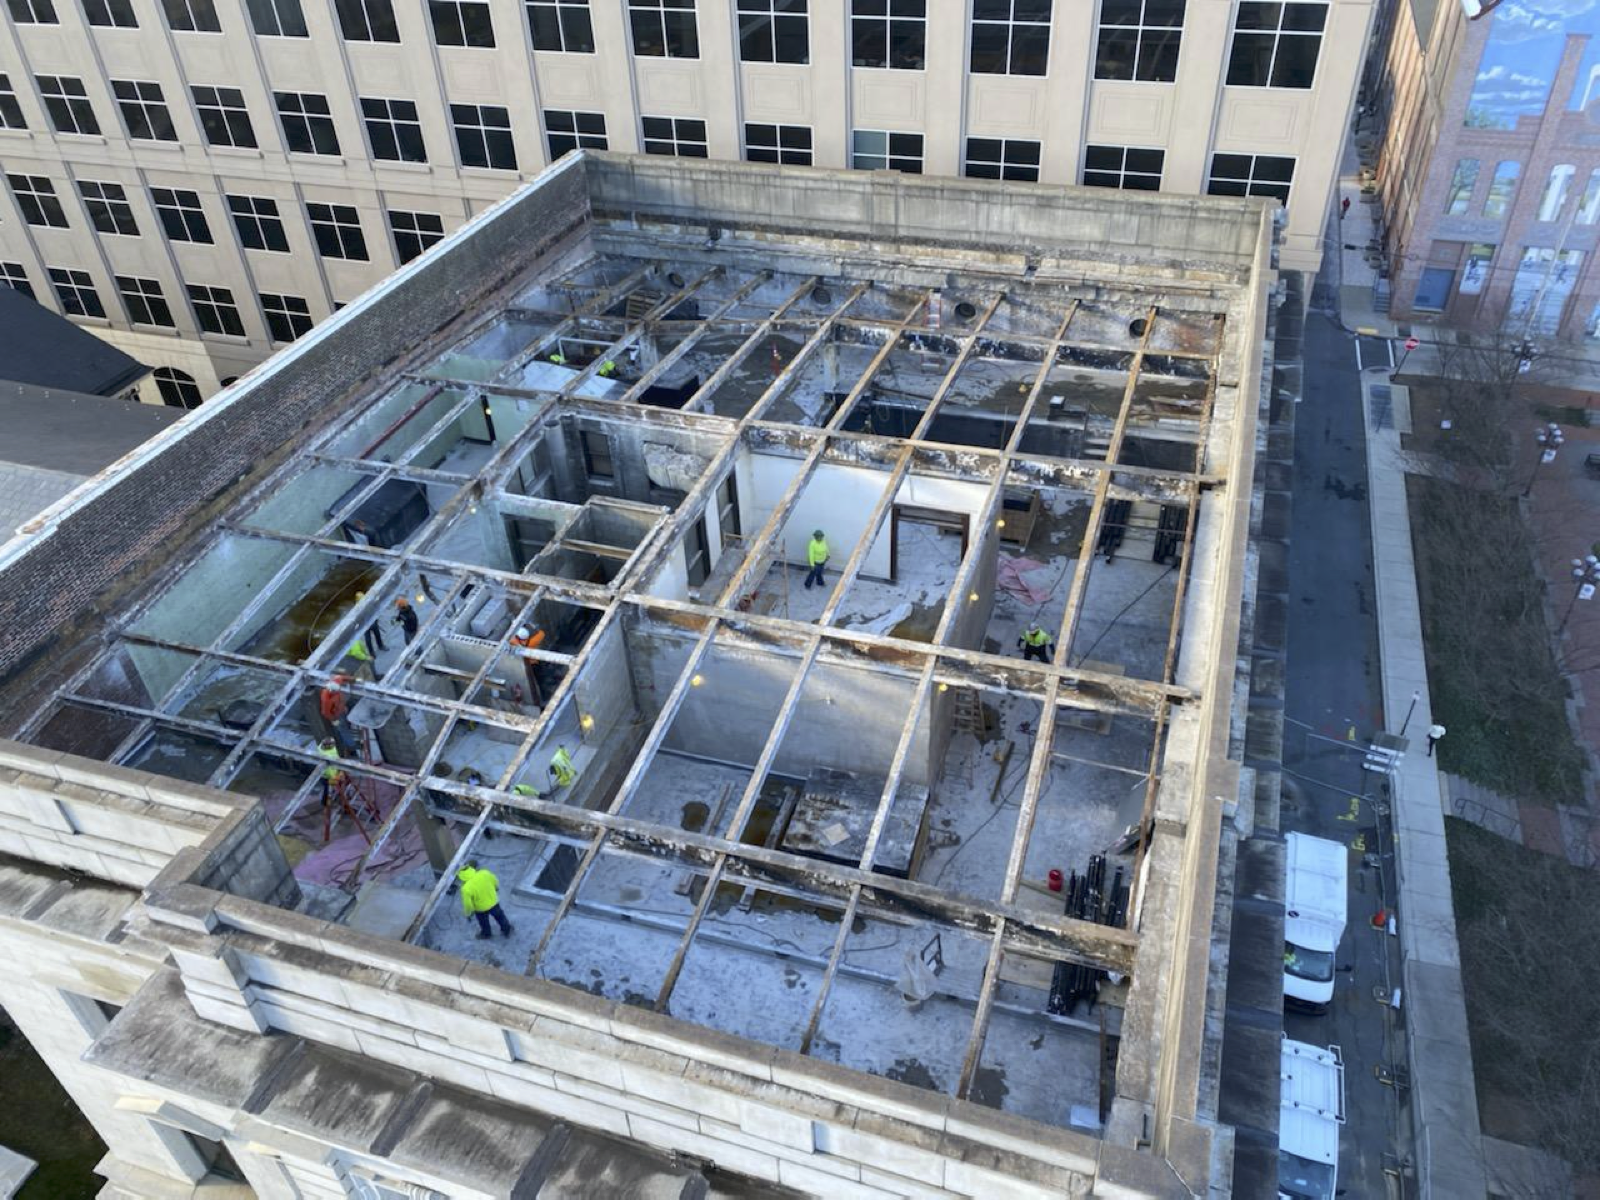 An aerial view of a building under construction with workers on the roof.